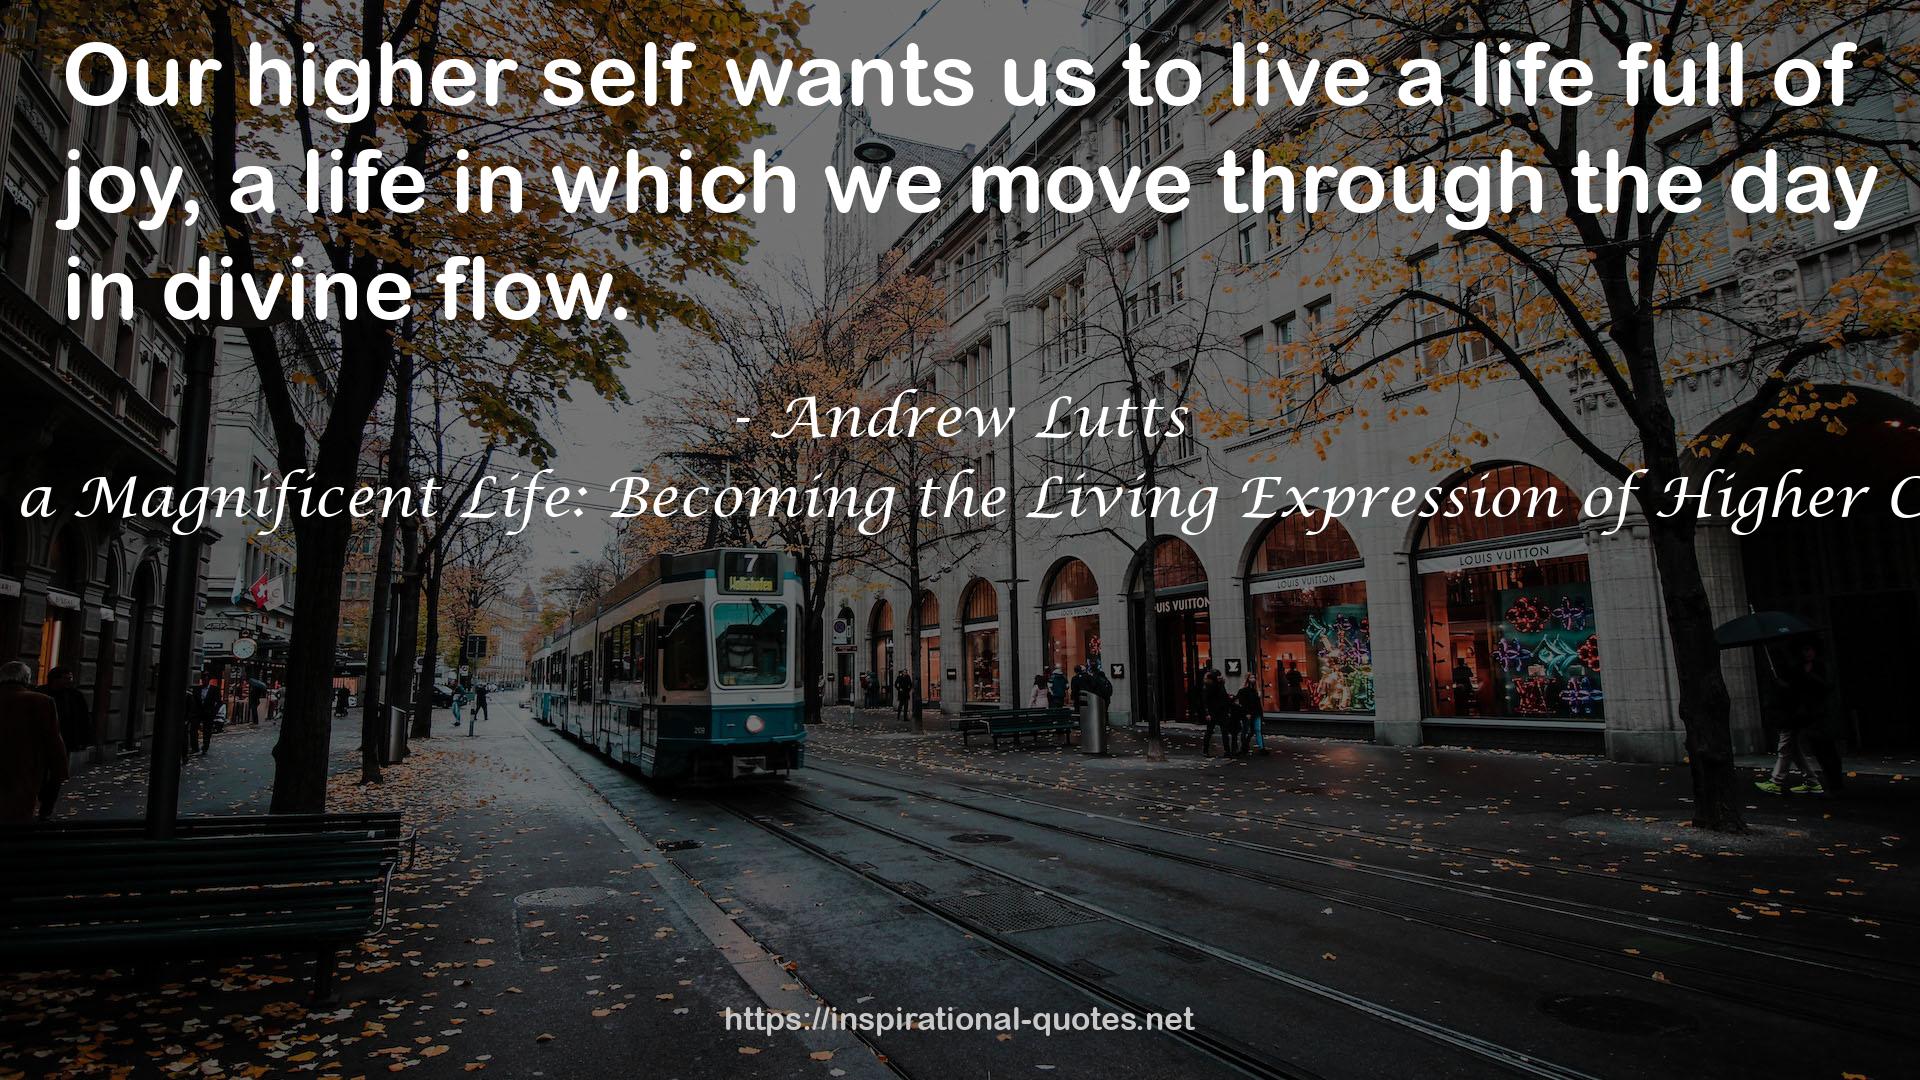 How to Live a Magnificent Life: Becoming the Living Expression of Higher Consciousness QUOTES